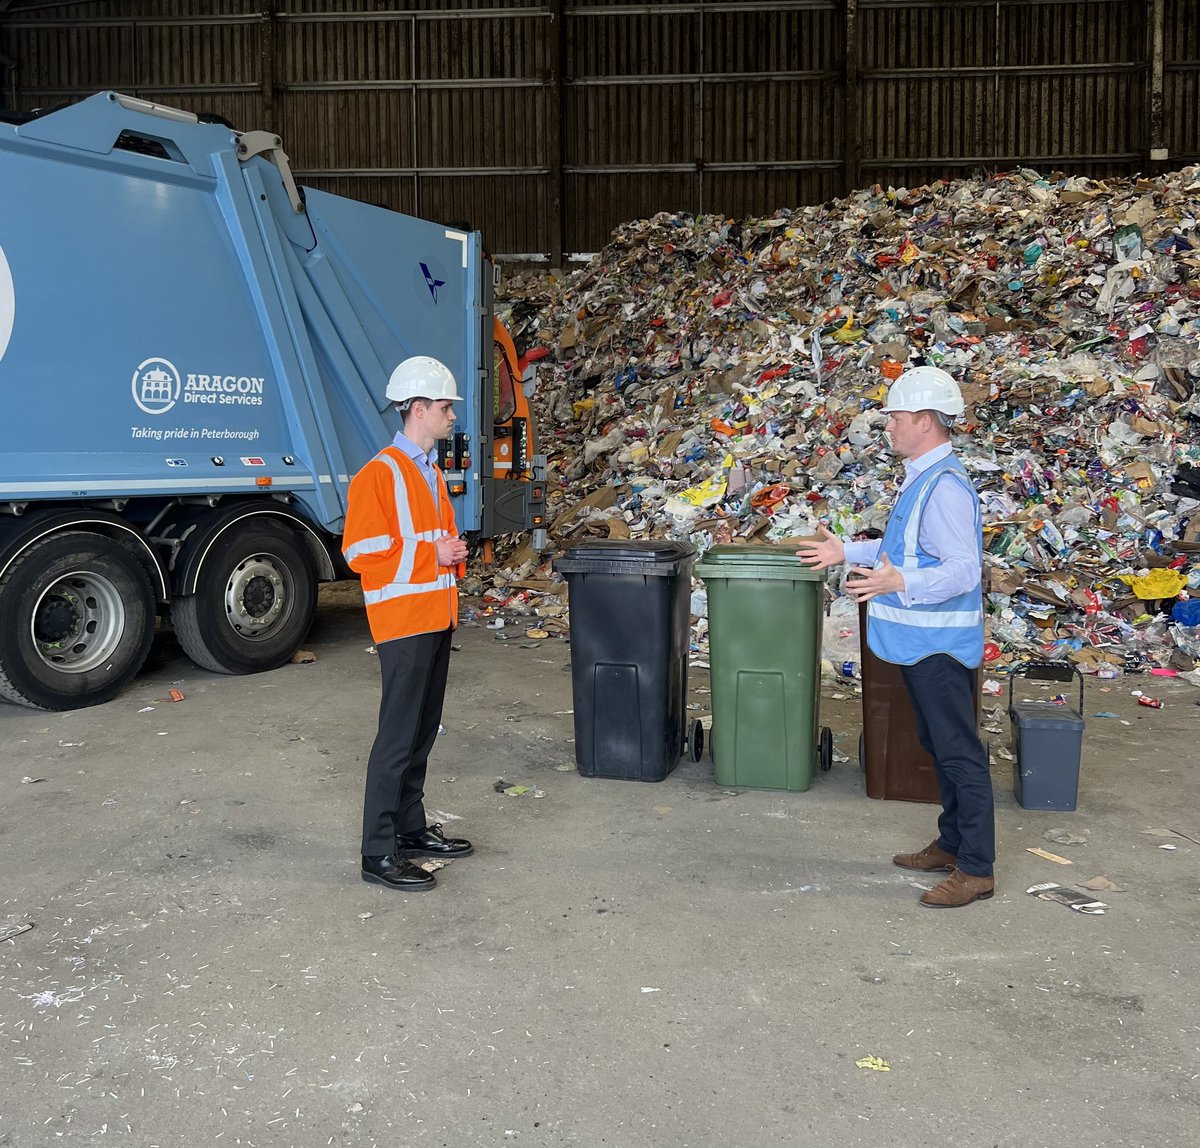 ♻️Today, we’re setting out how new waste collections will work to create continuity across all 🏴󠁧󠁢󠁥󠁮󠁧󠁿 local authority areas. Our 3 Bin approach - residual (non-recyclable) waste, dry recyclables & organic waste is part of our #SimplerRecycling approach. 👉 gov.uk/government/new…